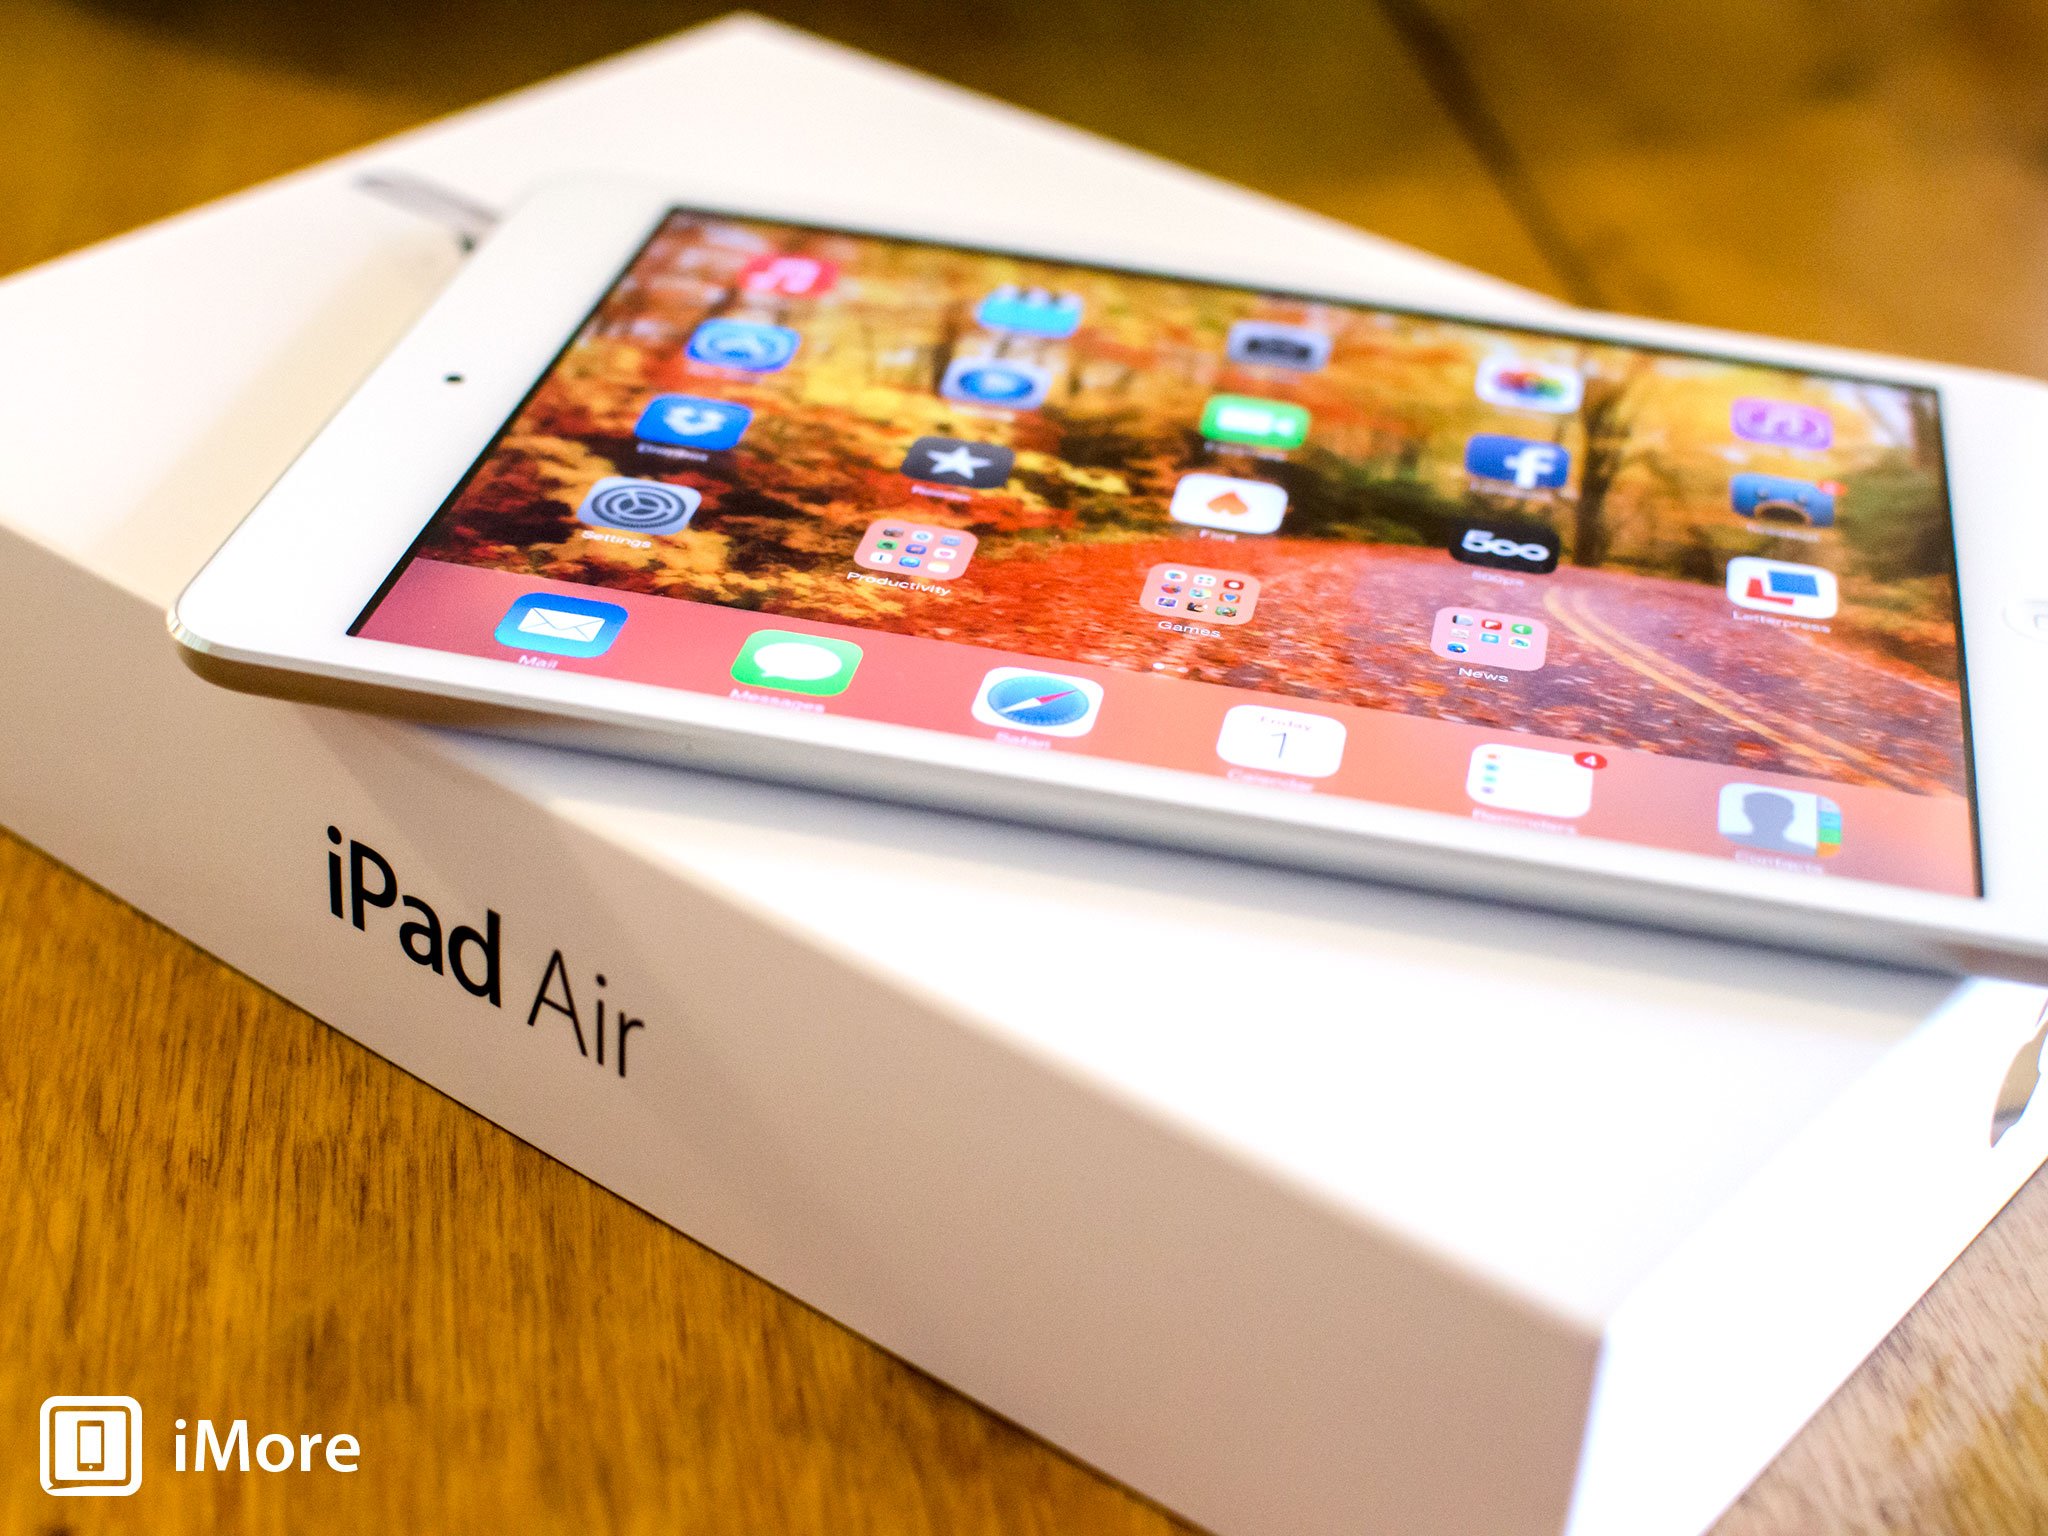 How to transfer data from your old iPad to your new iPad Air or Retina iPad mini